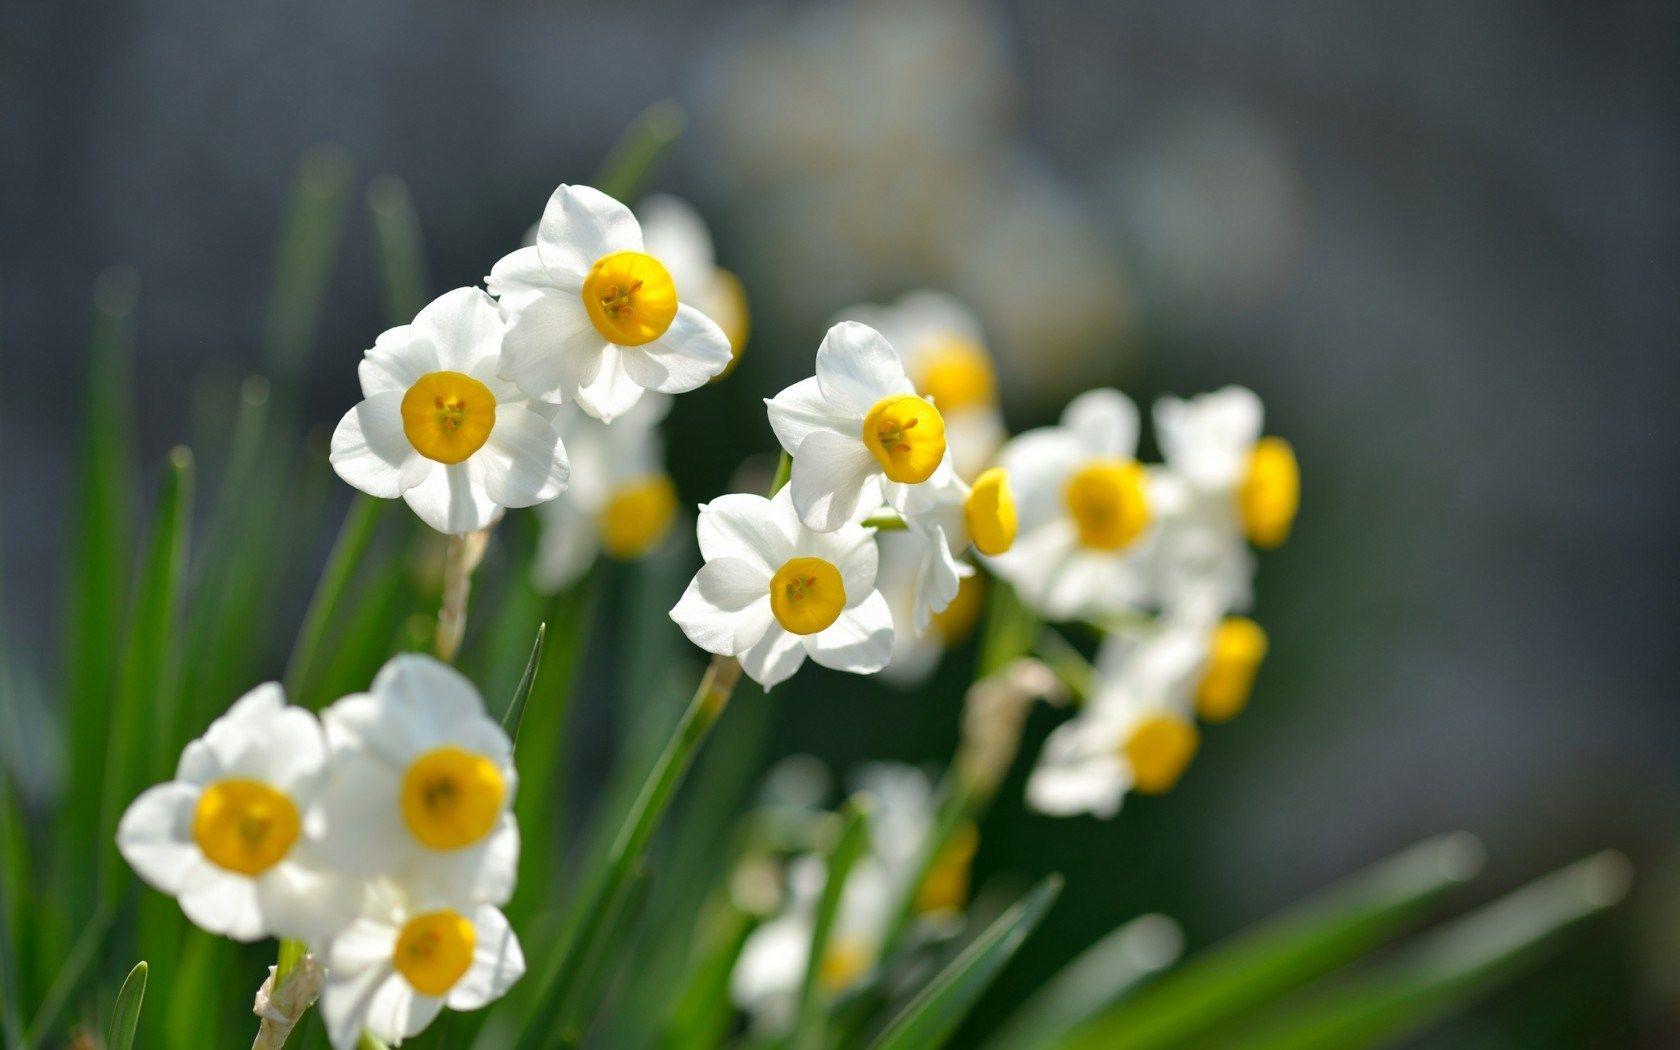 Narcissus Flower Logo - Narcissus flower hd wallpaper - HD Wallpapers